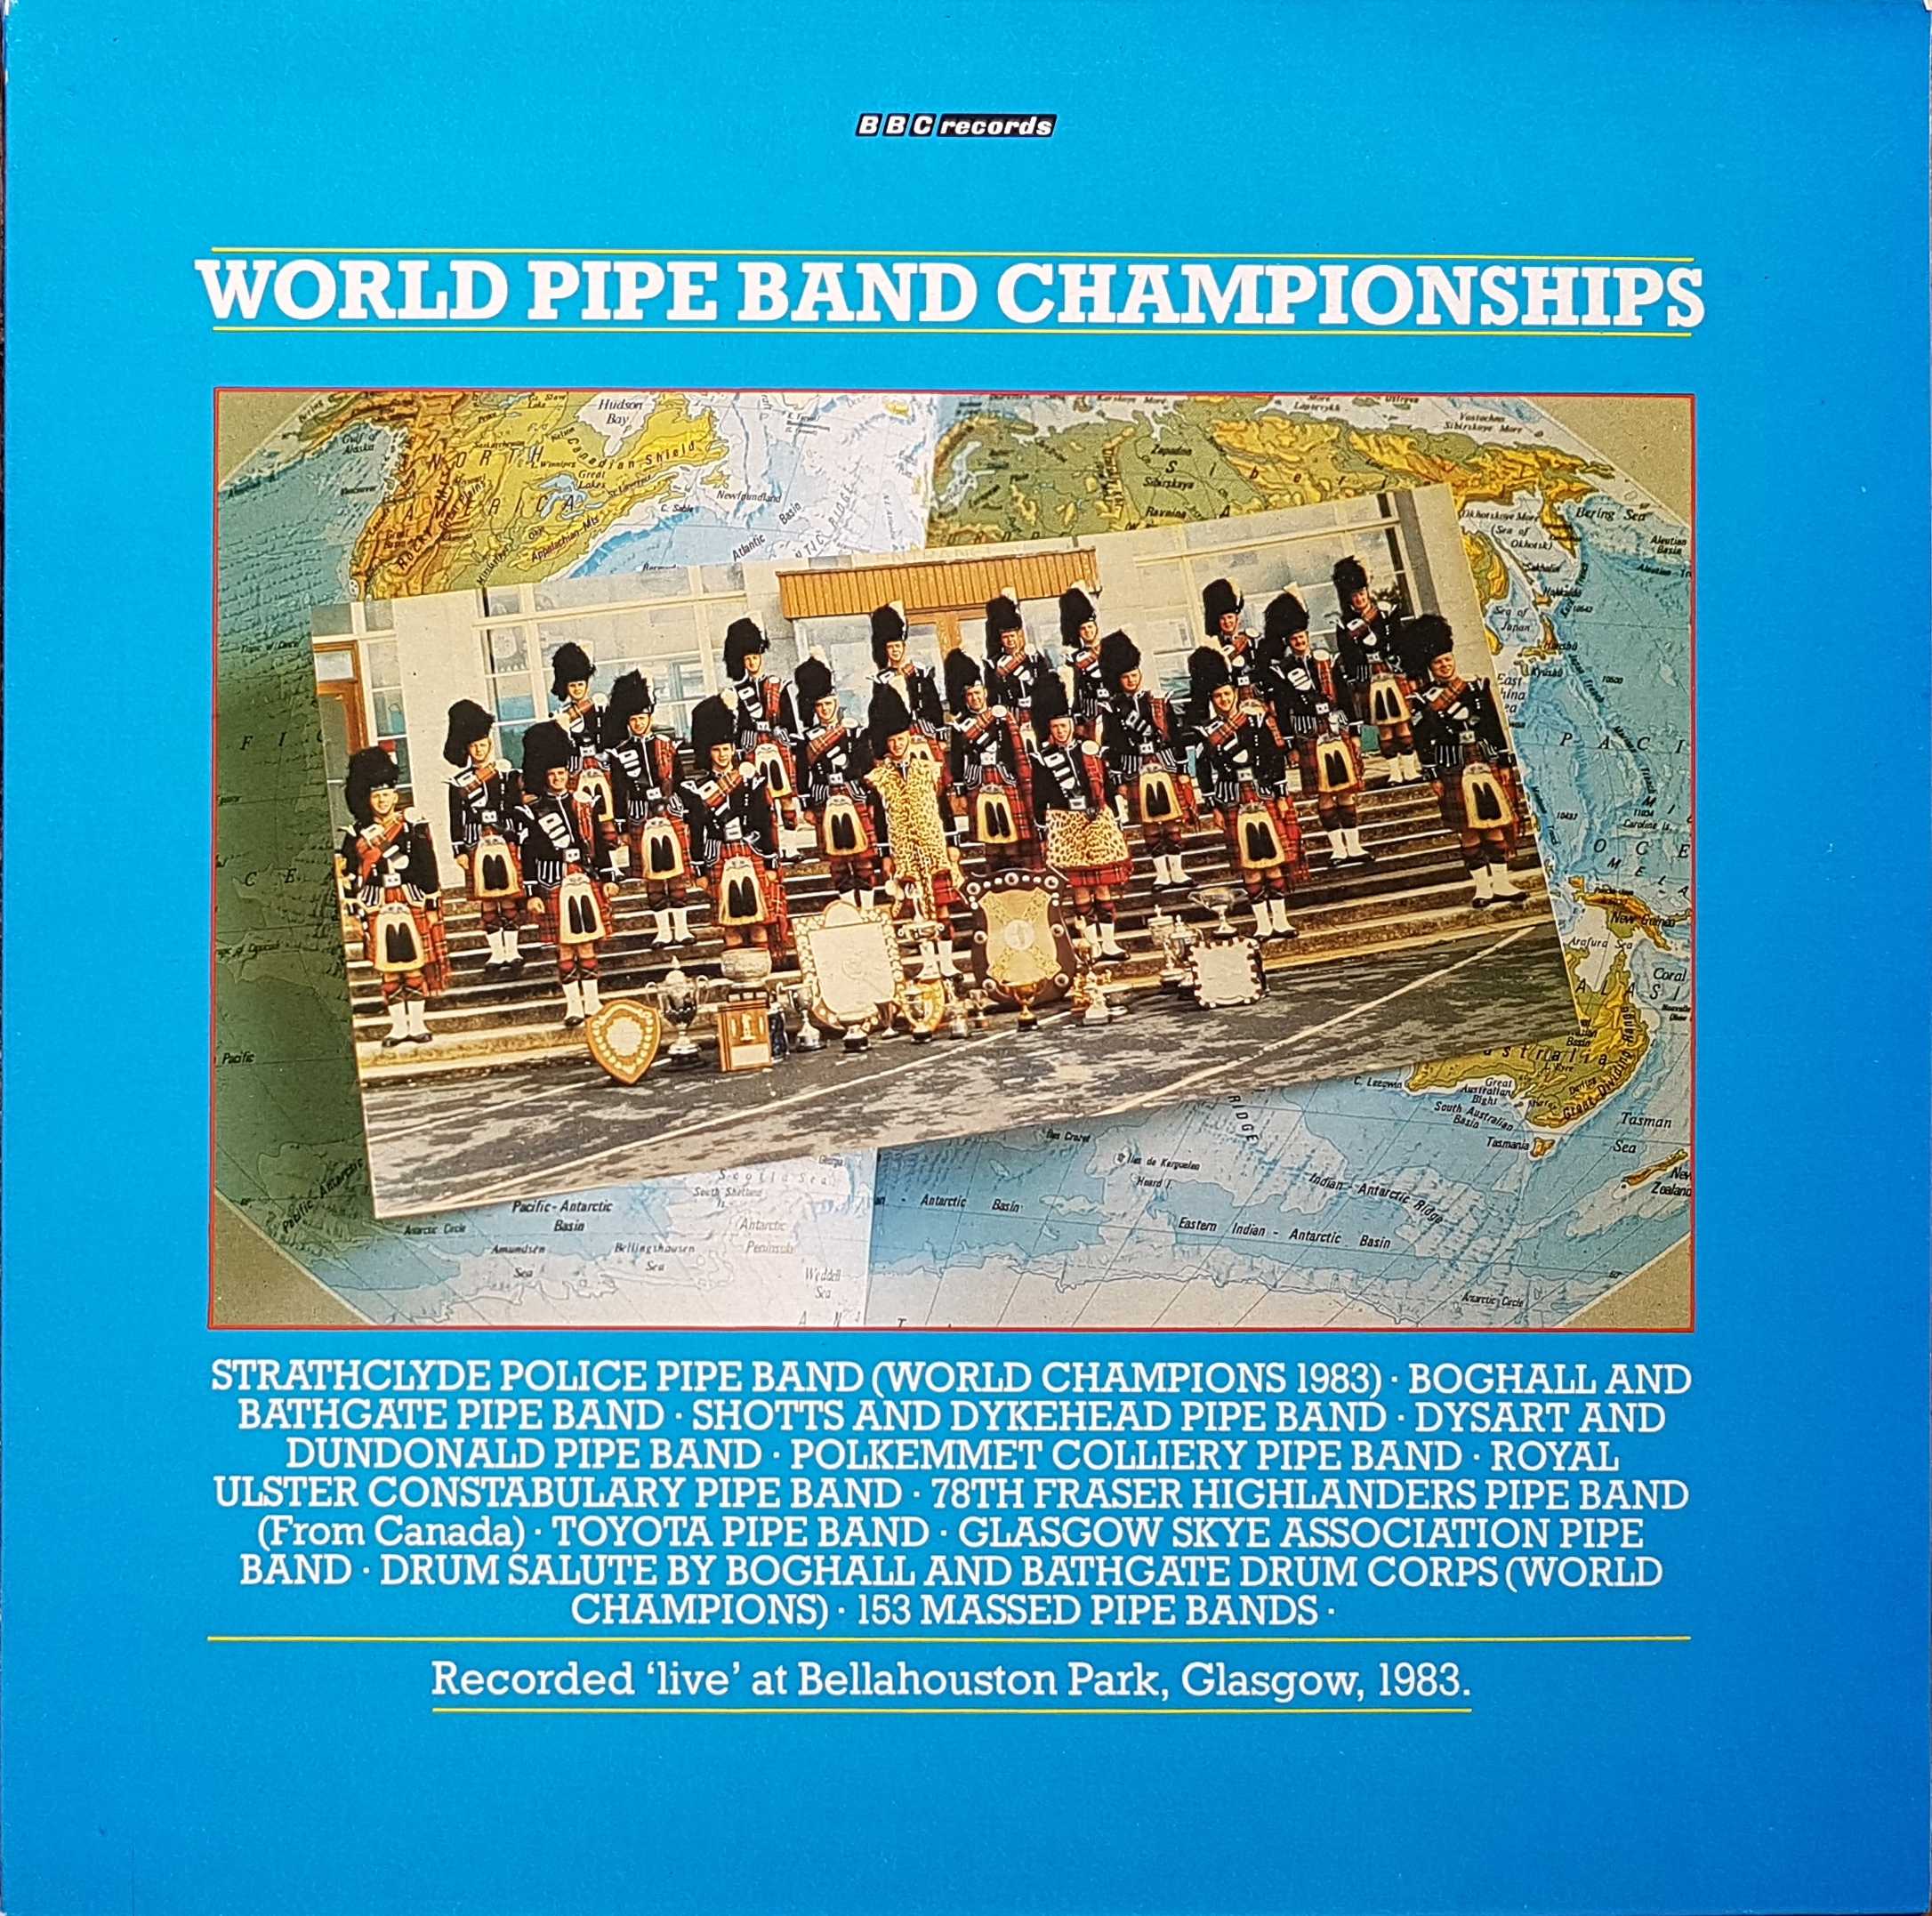 Picture of REC 490 World pipe band championships 1983 by artist Various from the BBC albums - Records and Tapes library